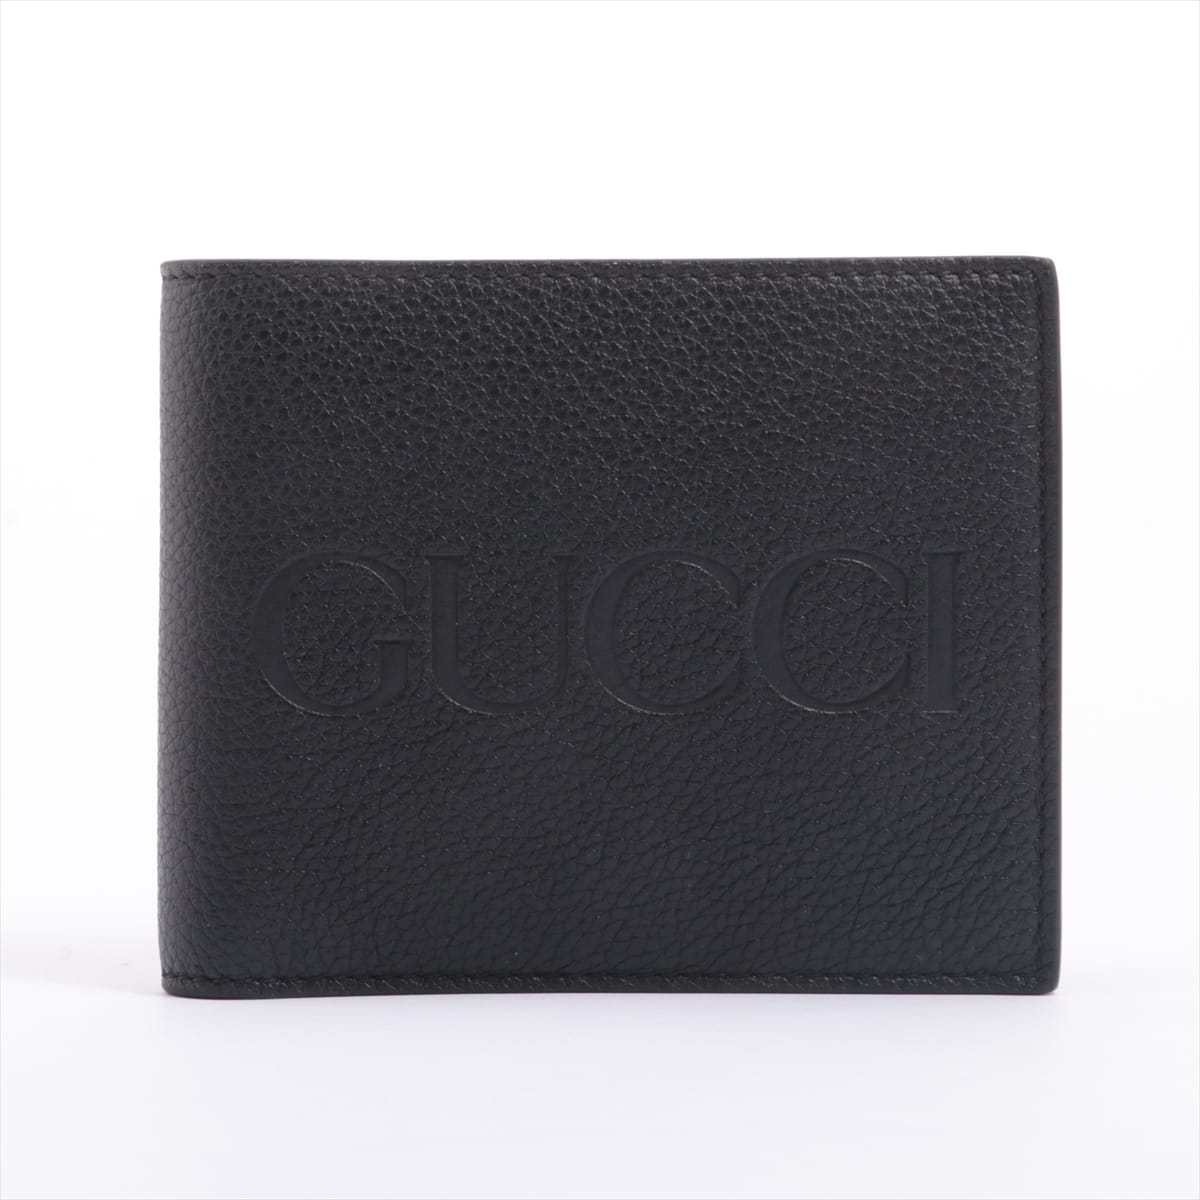 Gucci Logo Leather Compact Wallet Black 658681